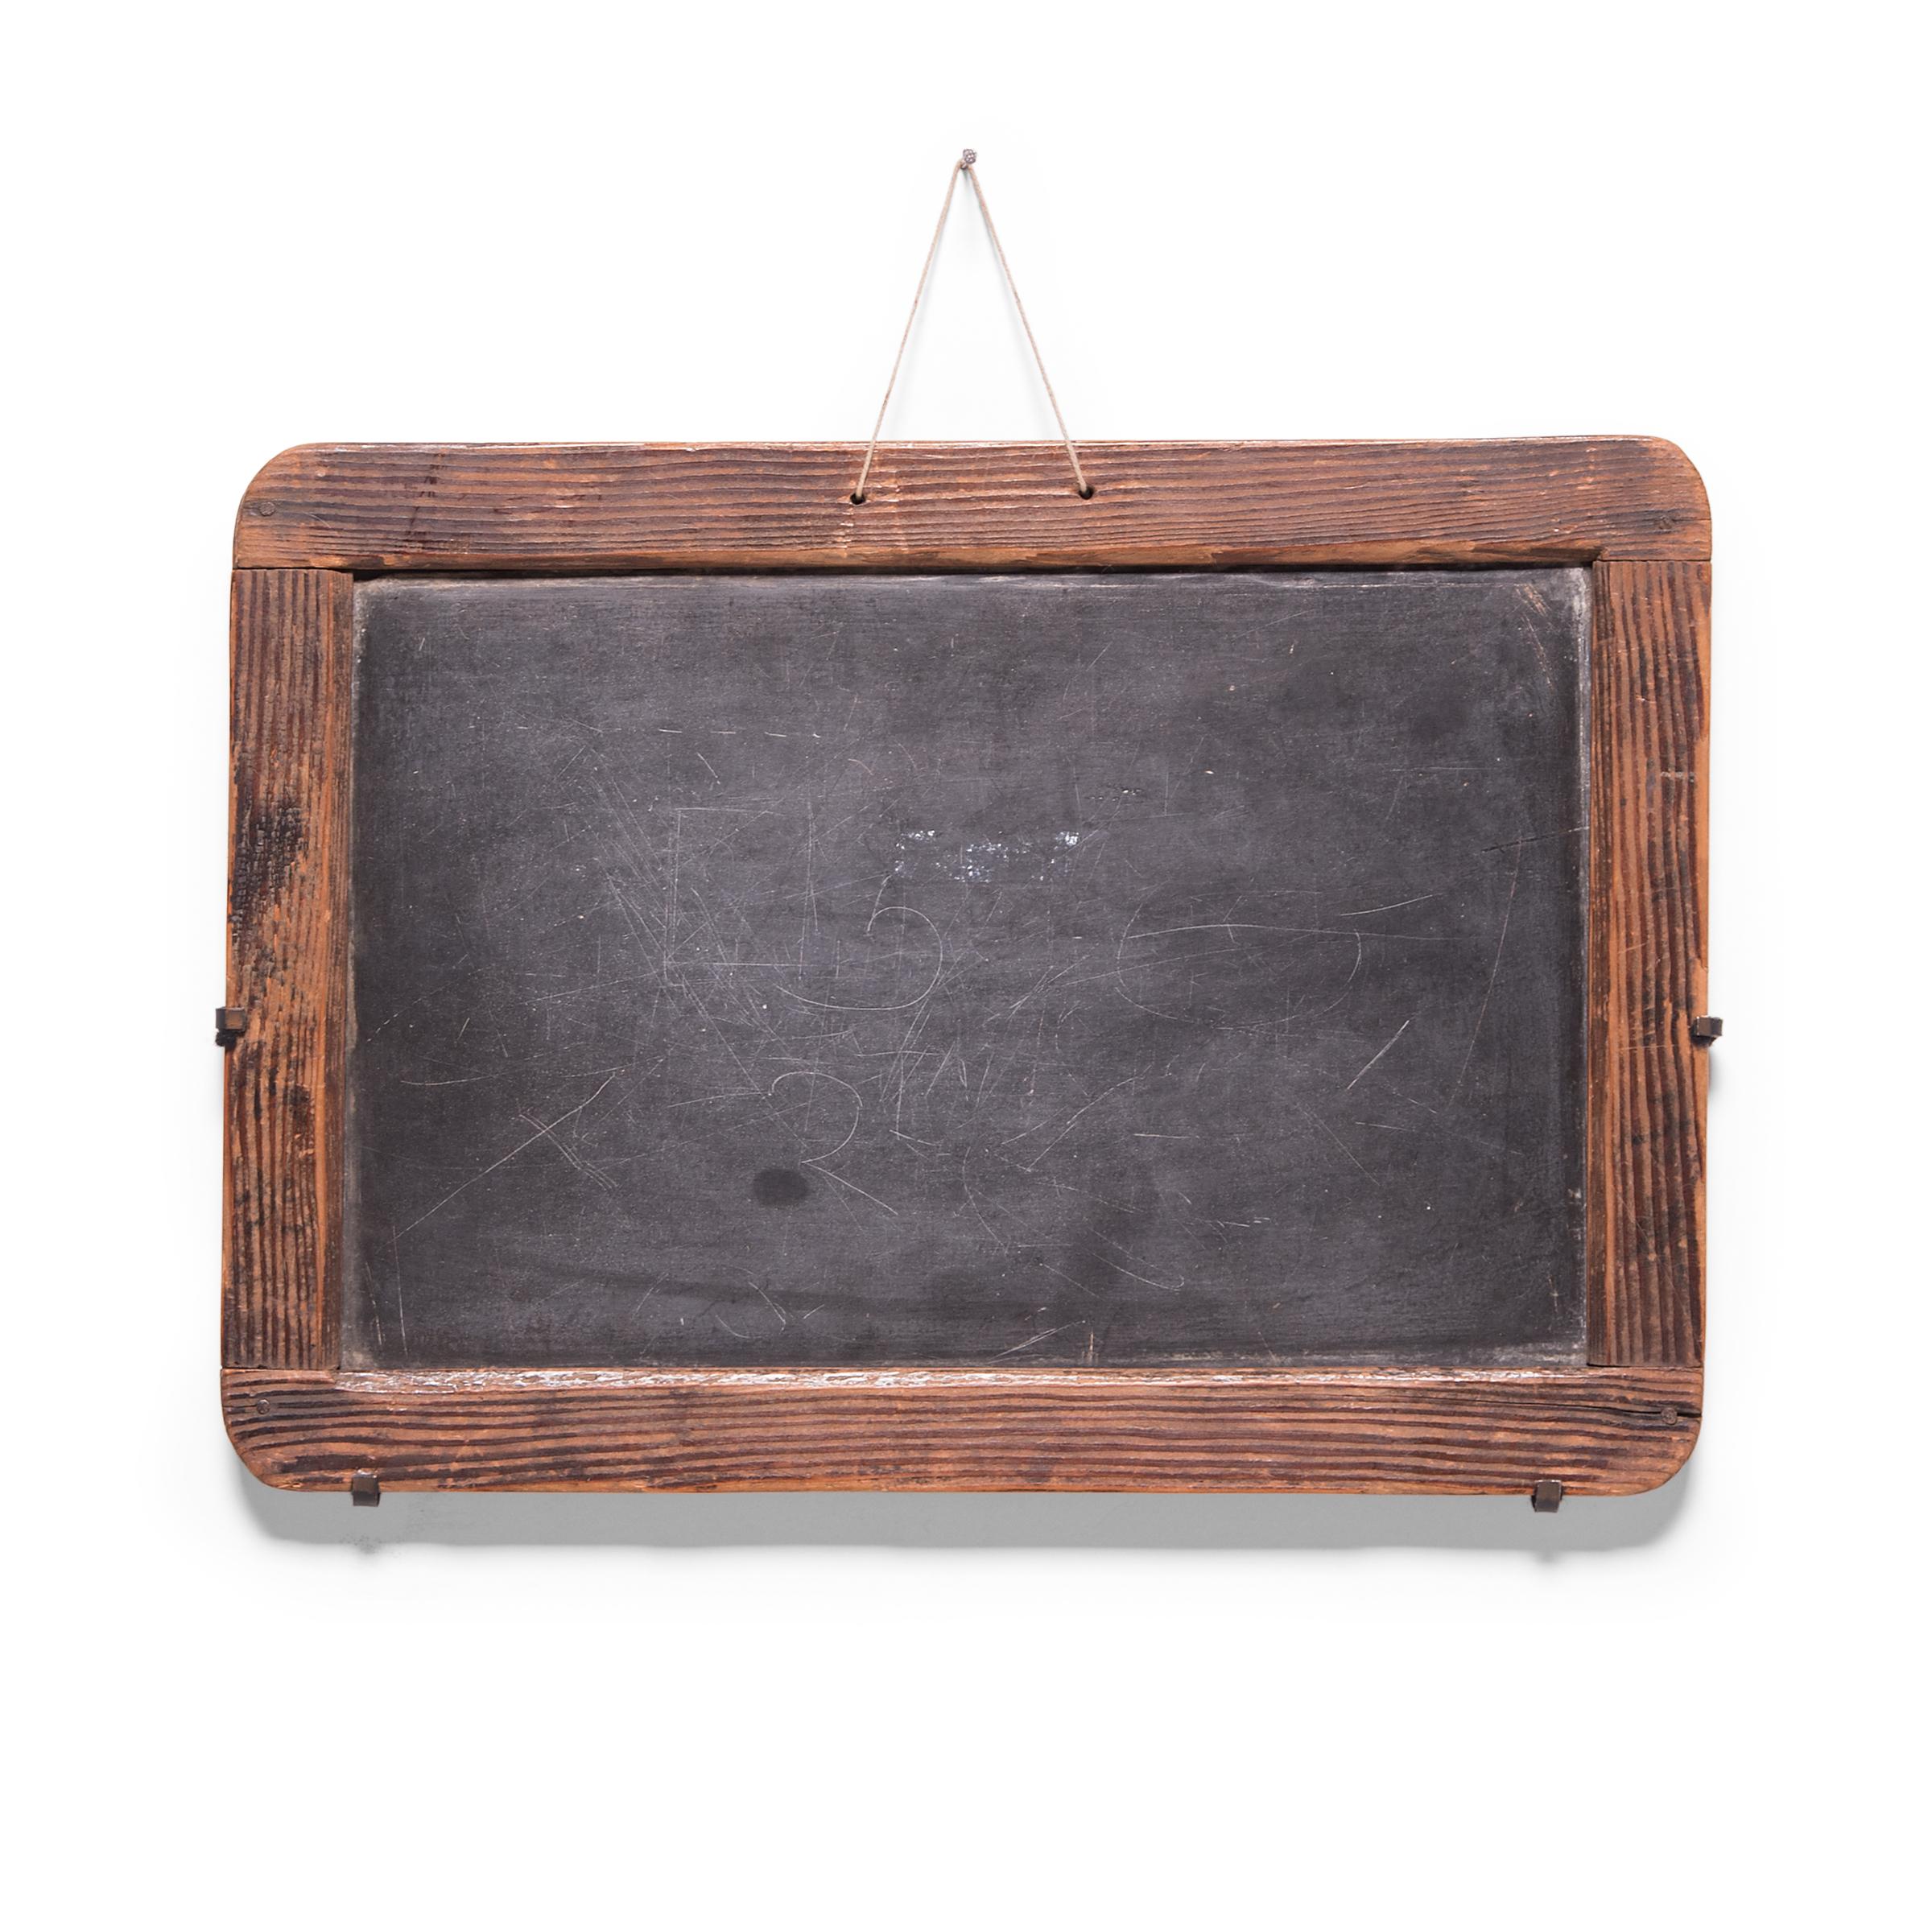 These slate boards would have been used by Qing-dynasty school children as part of the independent studies promoted in provincial academies. While the Ming dynasty can be credited with establishing local schools throughout the empire, it was the